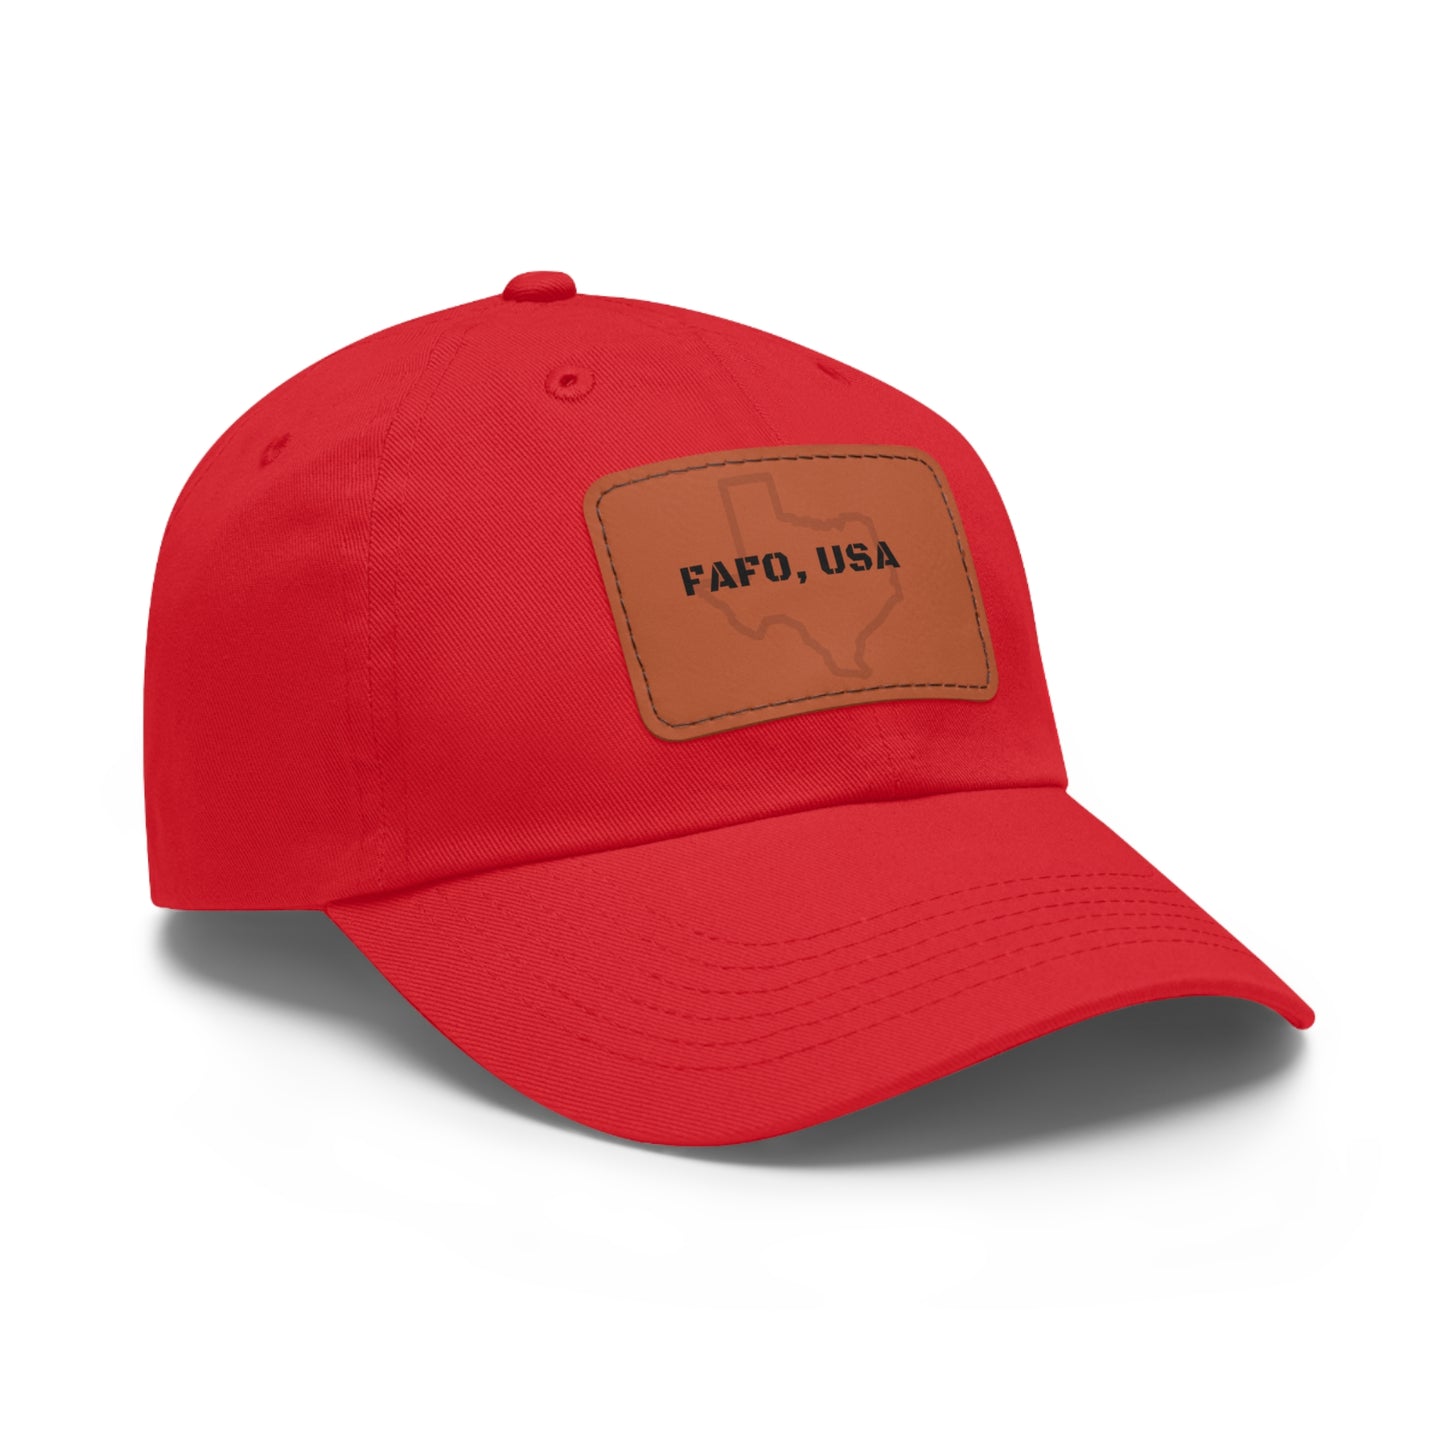 FAFO, USA (TX) Leather Patch Hat